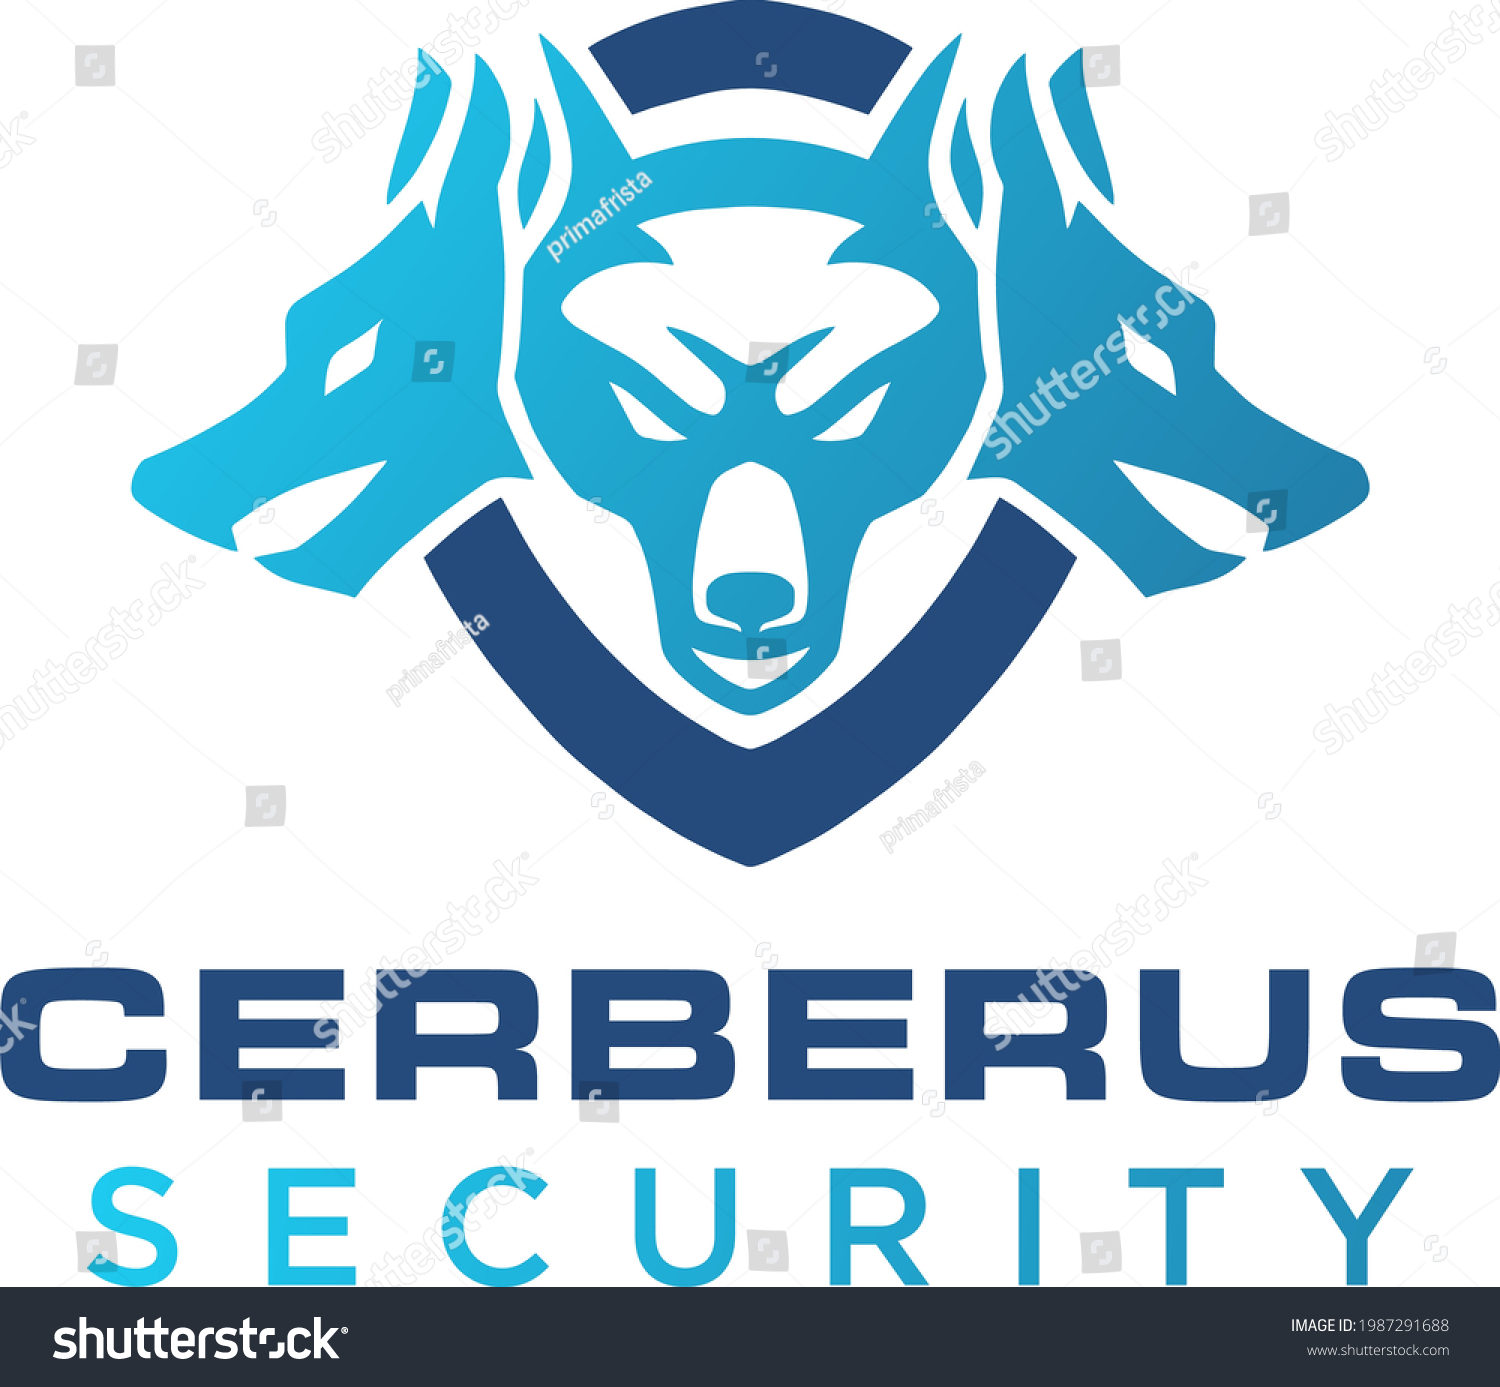 SVG of Simple and modern cerberus logo for company, business, community, team, etc. svg